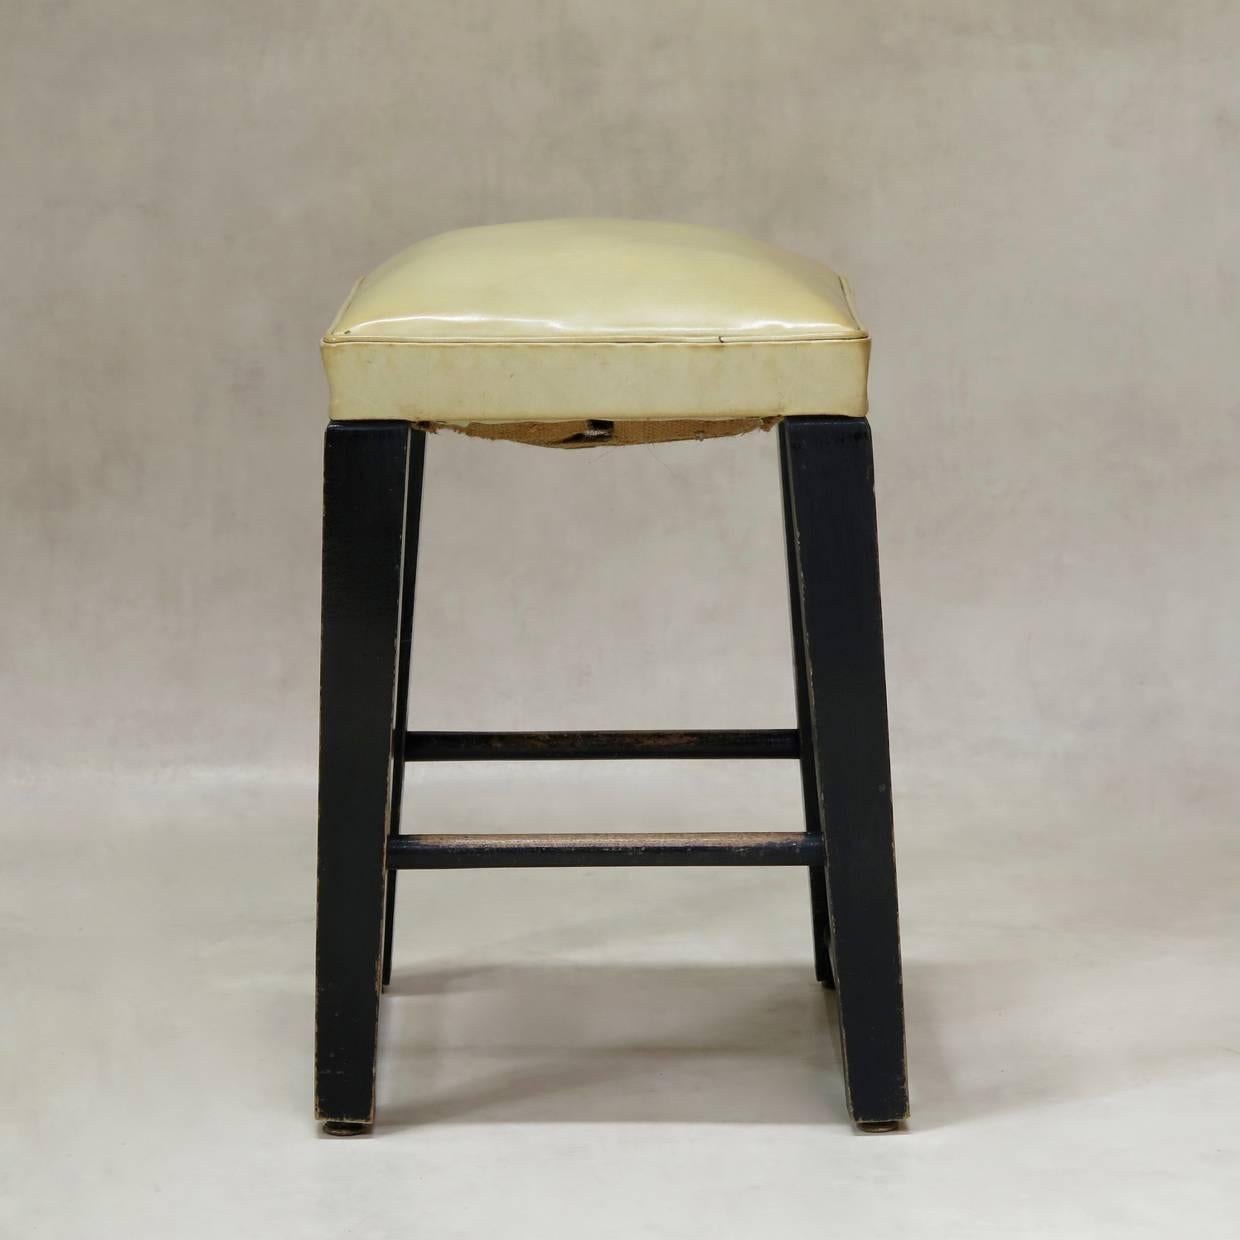 Striking pair of modernist stools. The bases are painted black (now rather worn) with tapering, block legs, slightly splayed and joined together by foot rests on two different levels. The seats are covered with the original ivory-coloured naugahyde